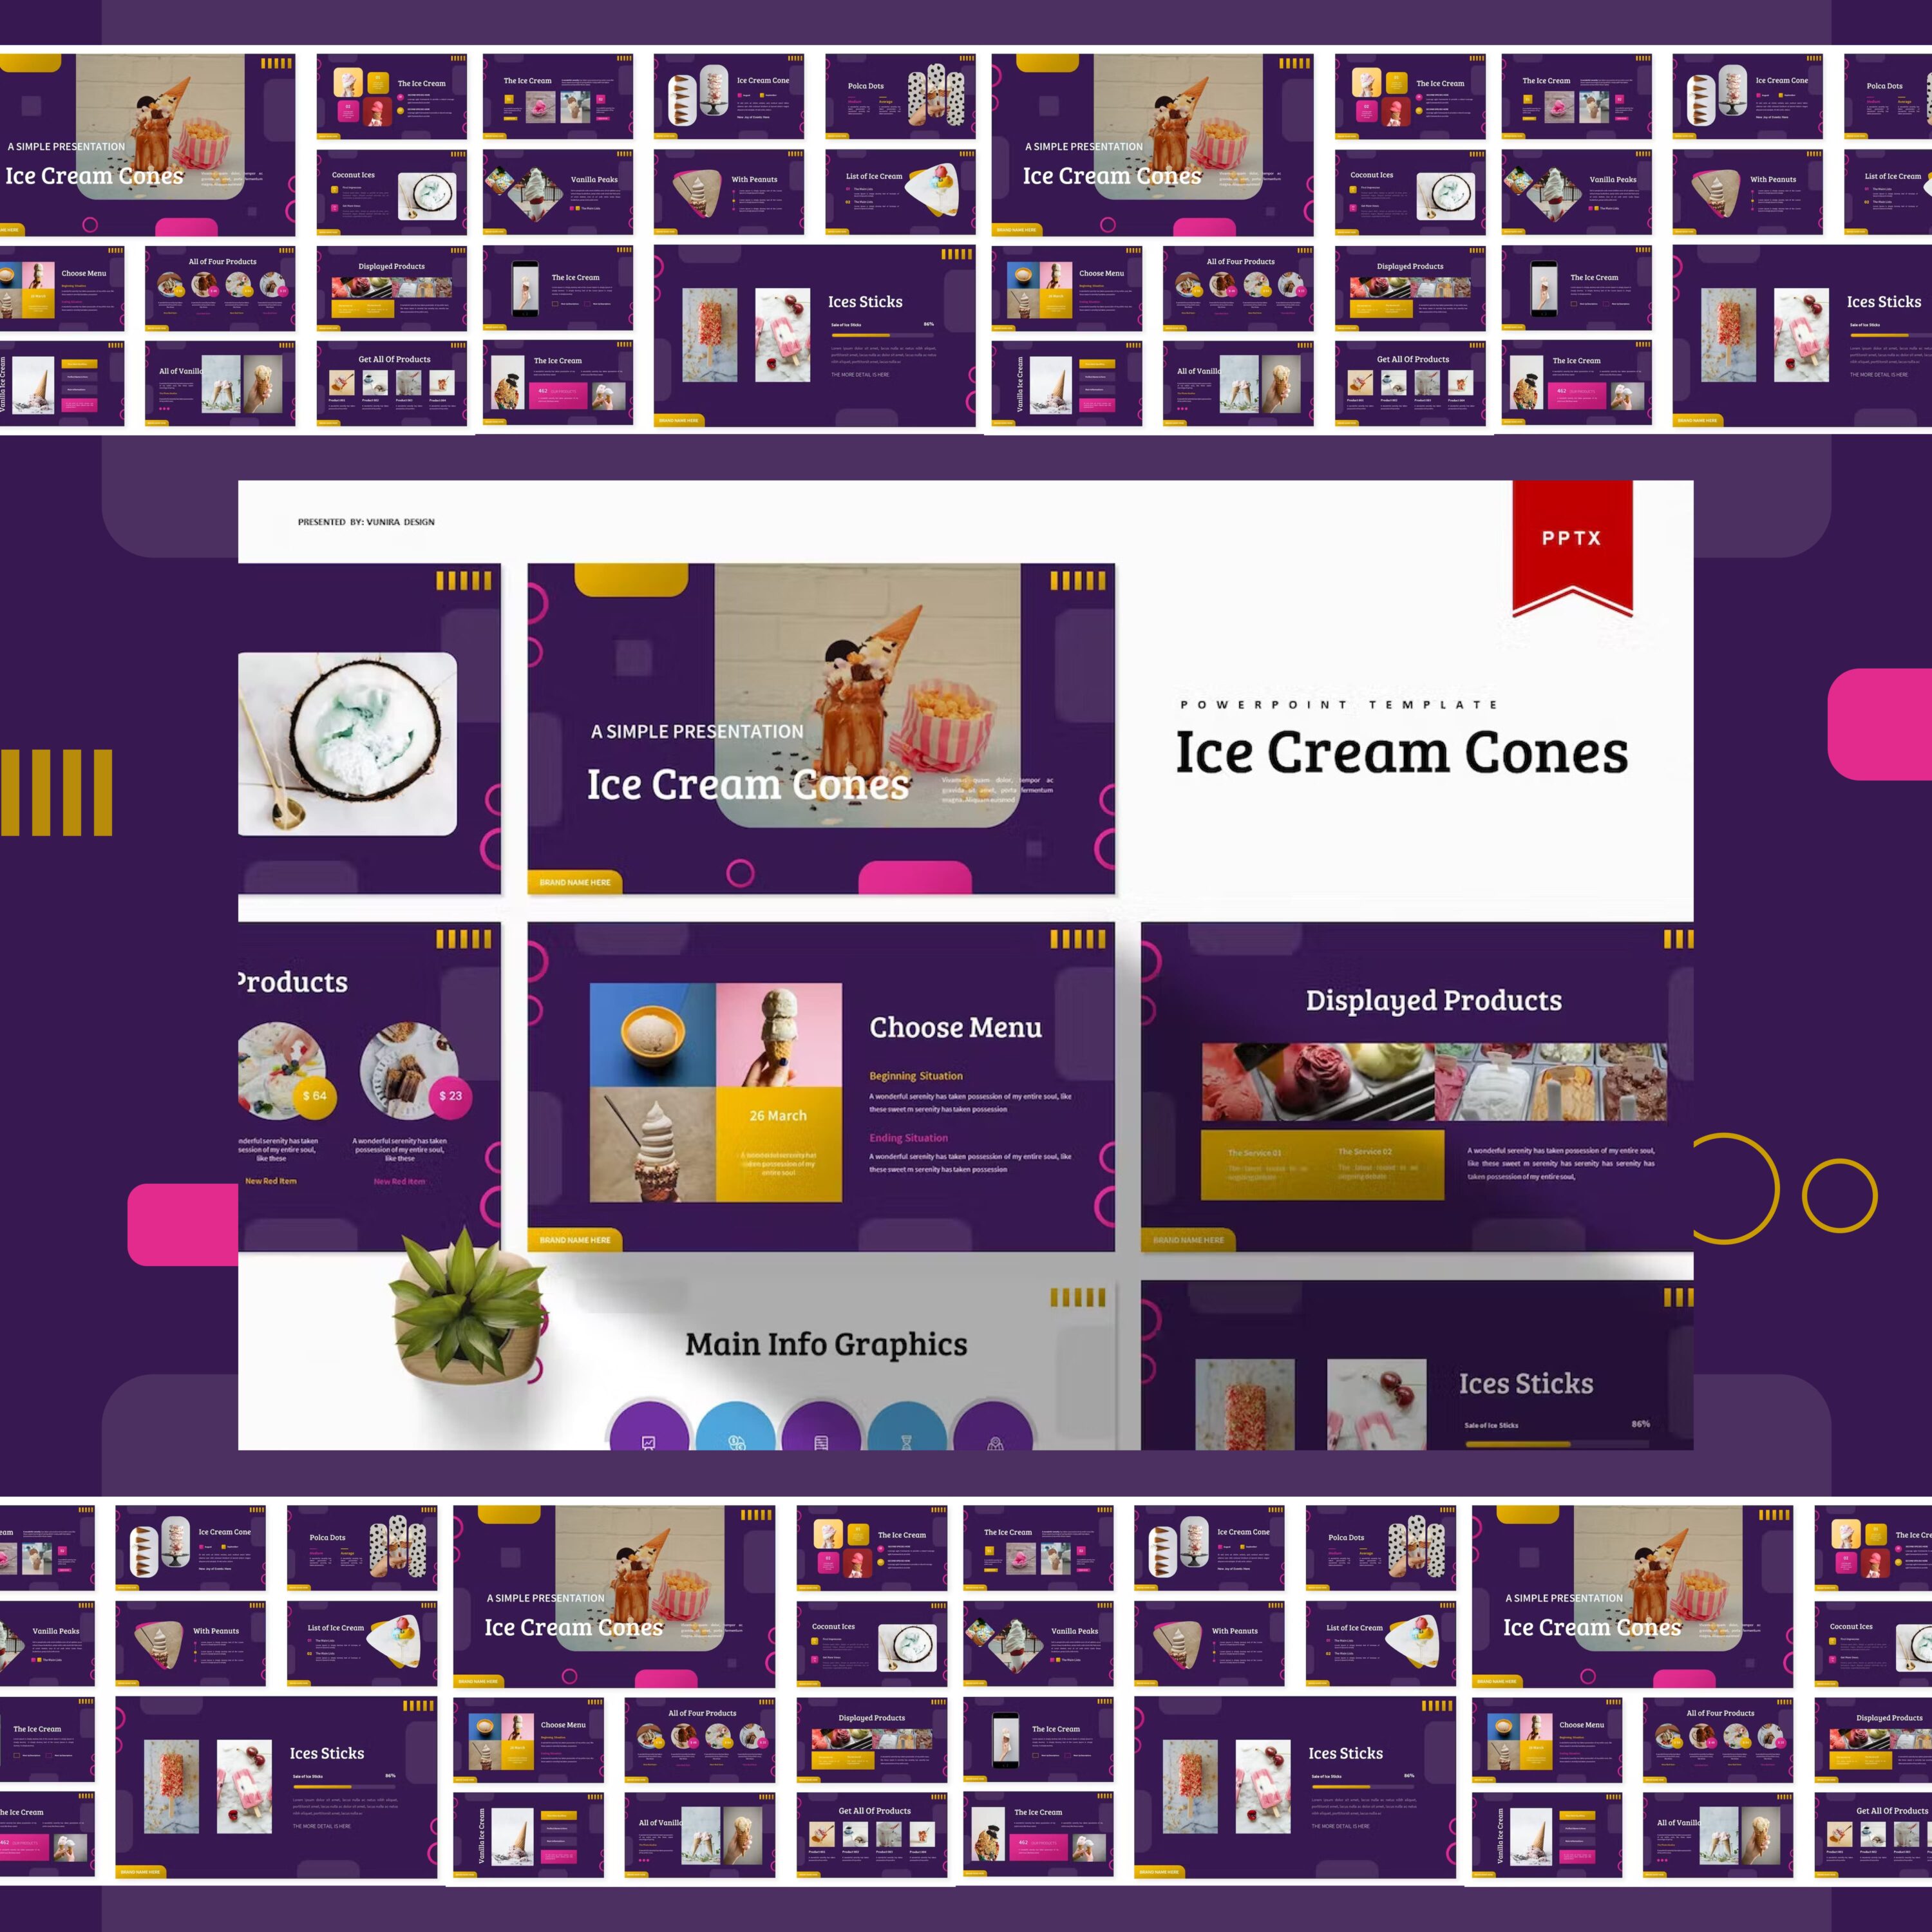 Preview ice cream cones powerpoint template.